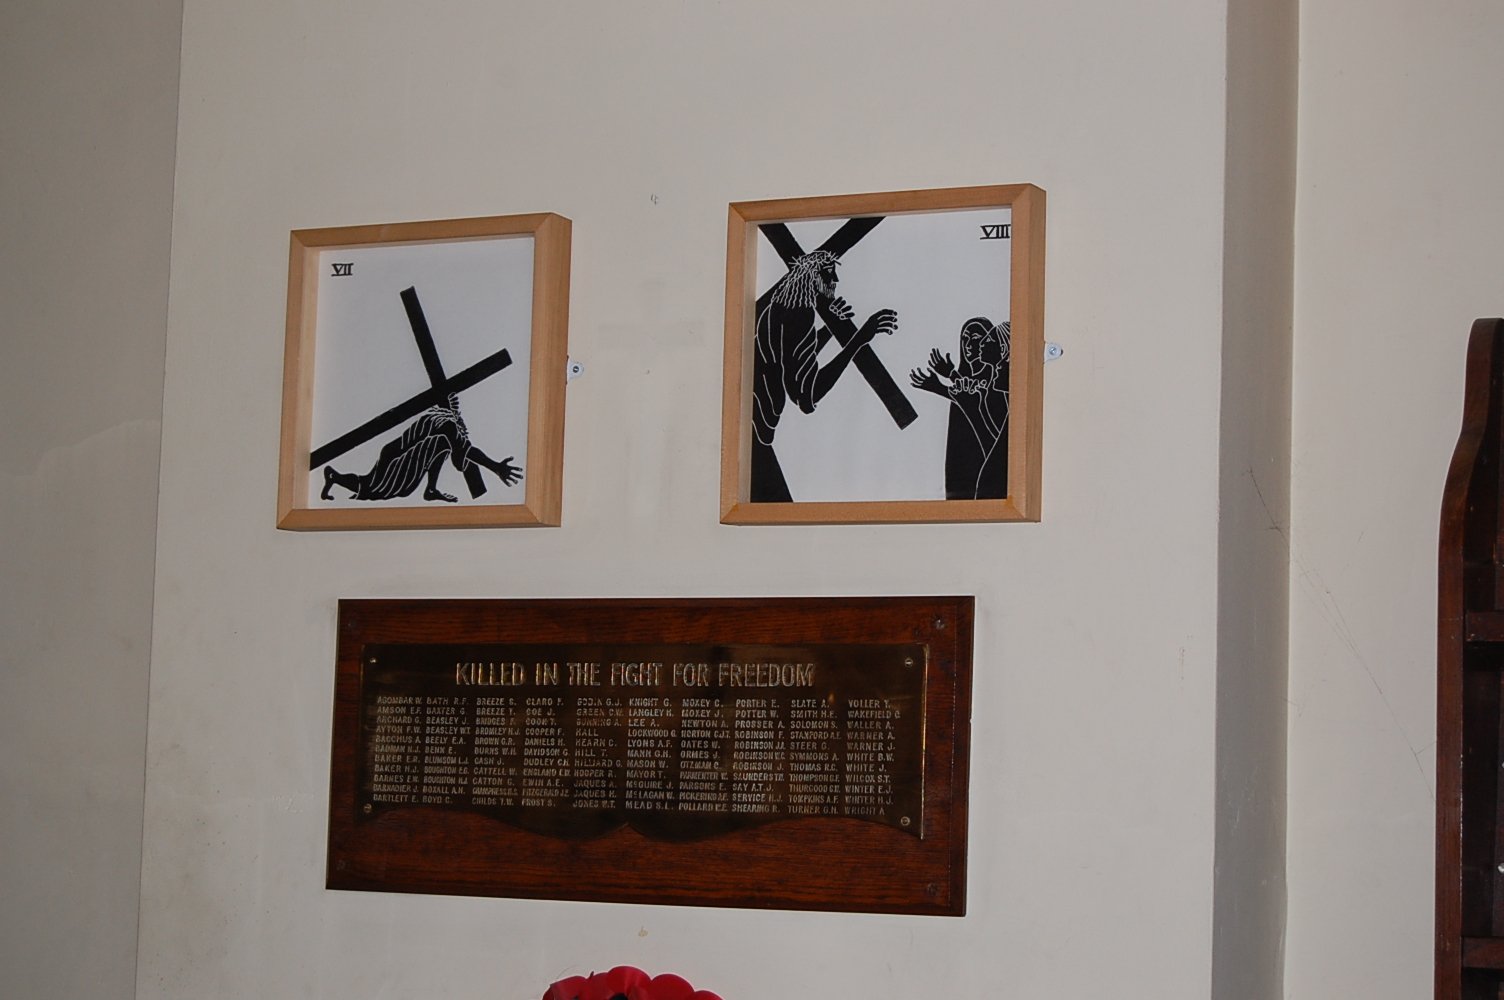 Stations of the Cross in situ